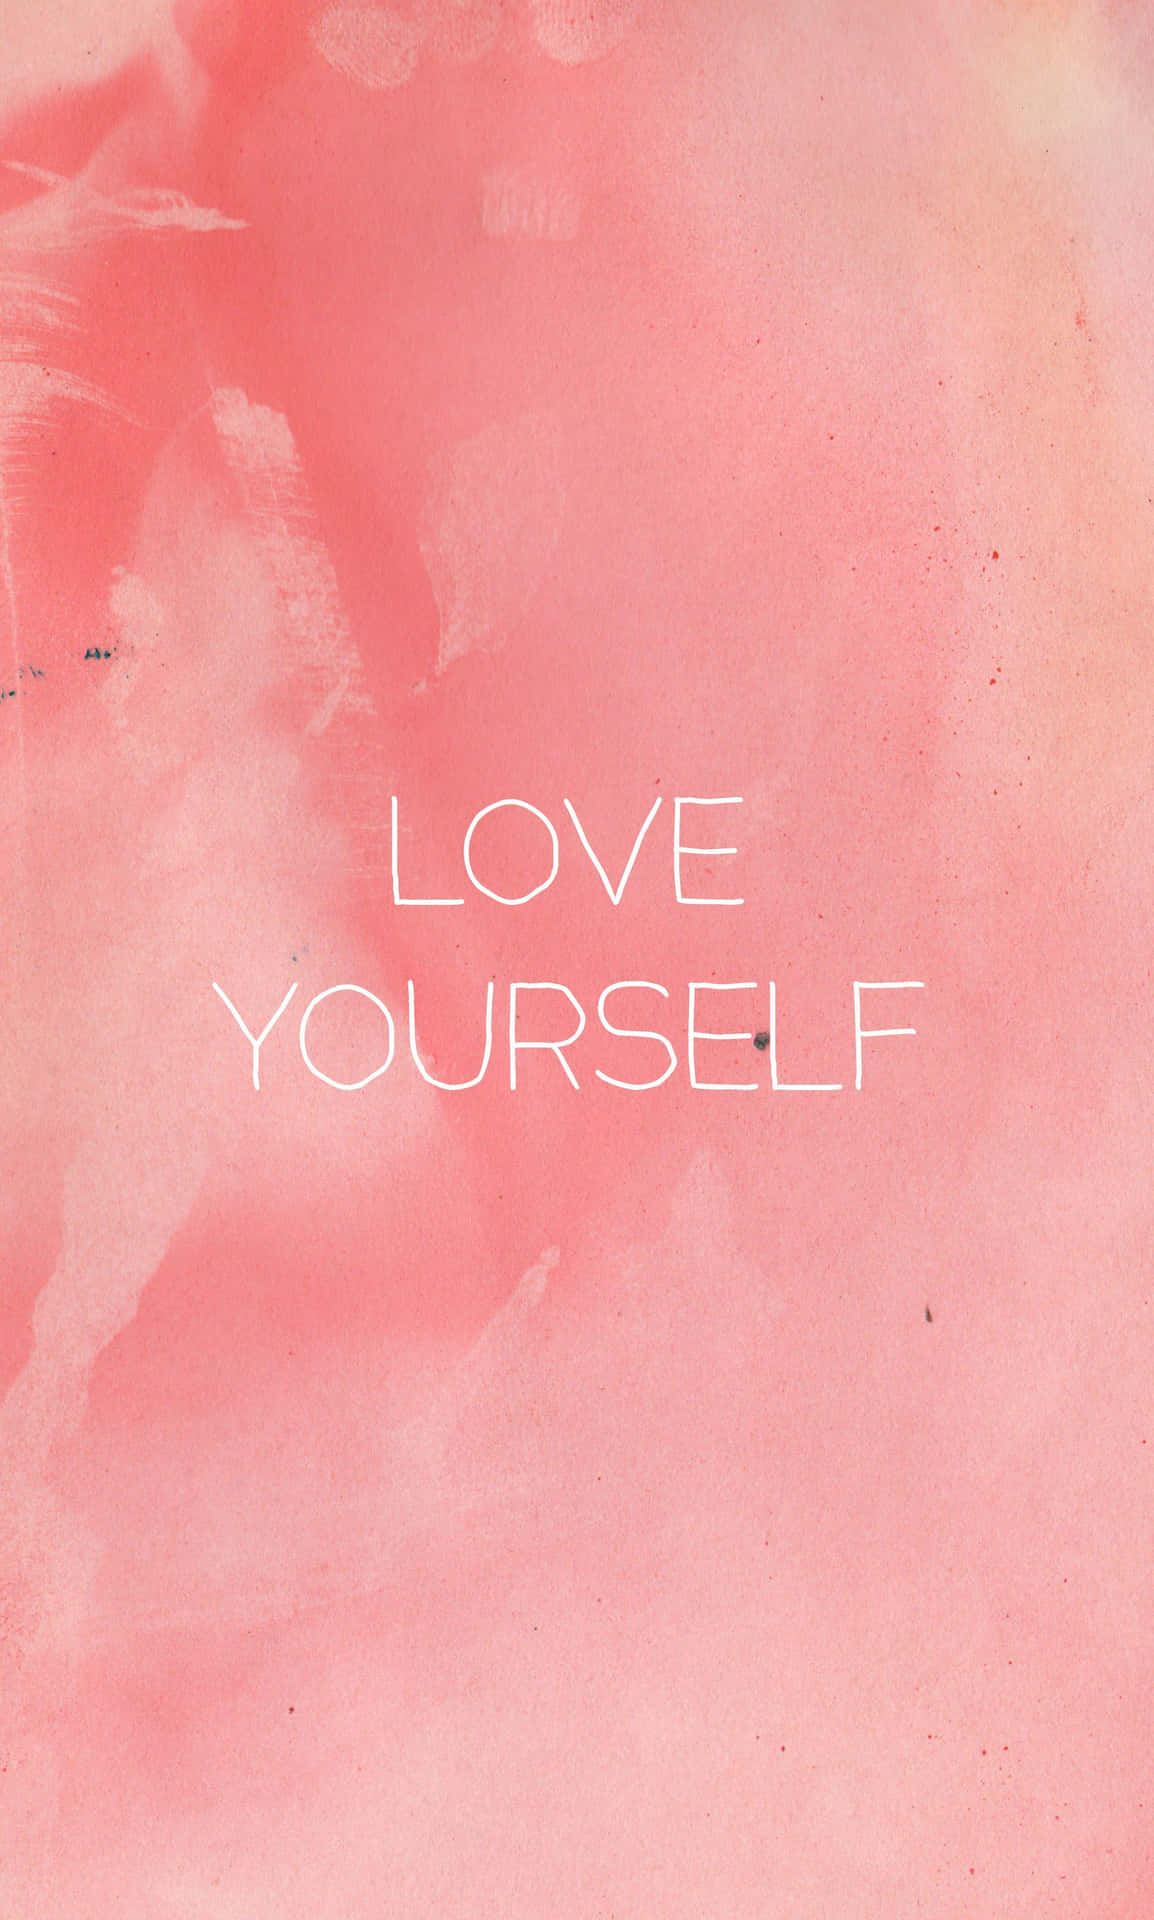 Choose to love and accept yourself Wallpaper